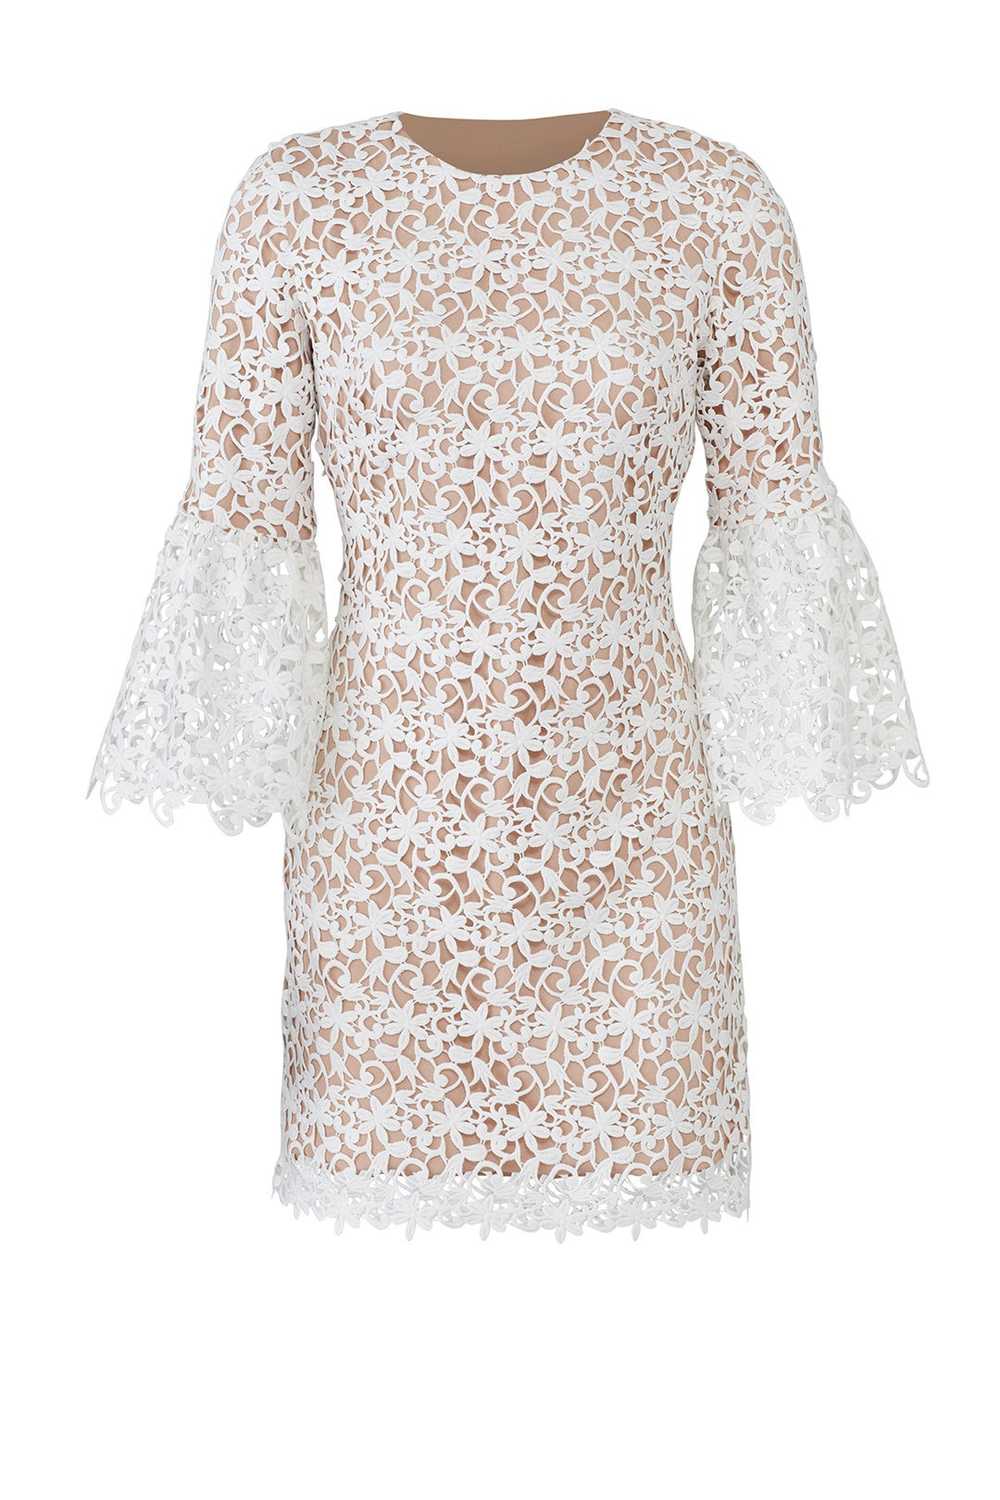 Dress The Population Bell Sleeve Lace Dress - image 4